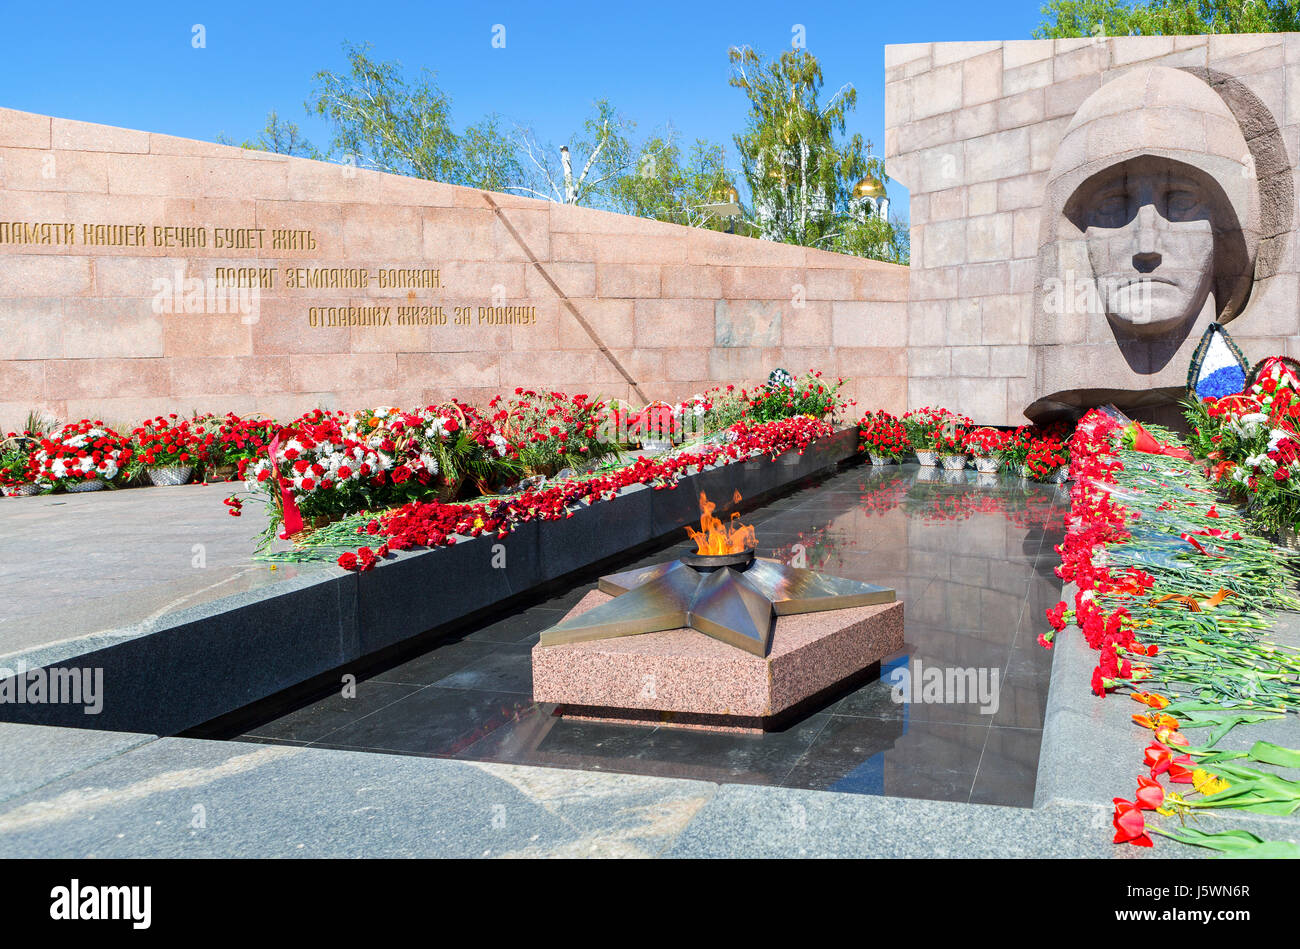 Samara, Russia - May 14, 2017: Eternal flame and flowers in memory of the Victory in the Great Patriotic War Stock Photo